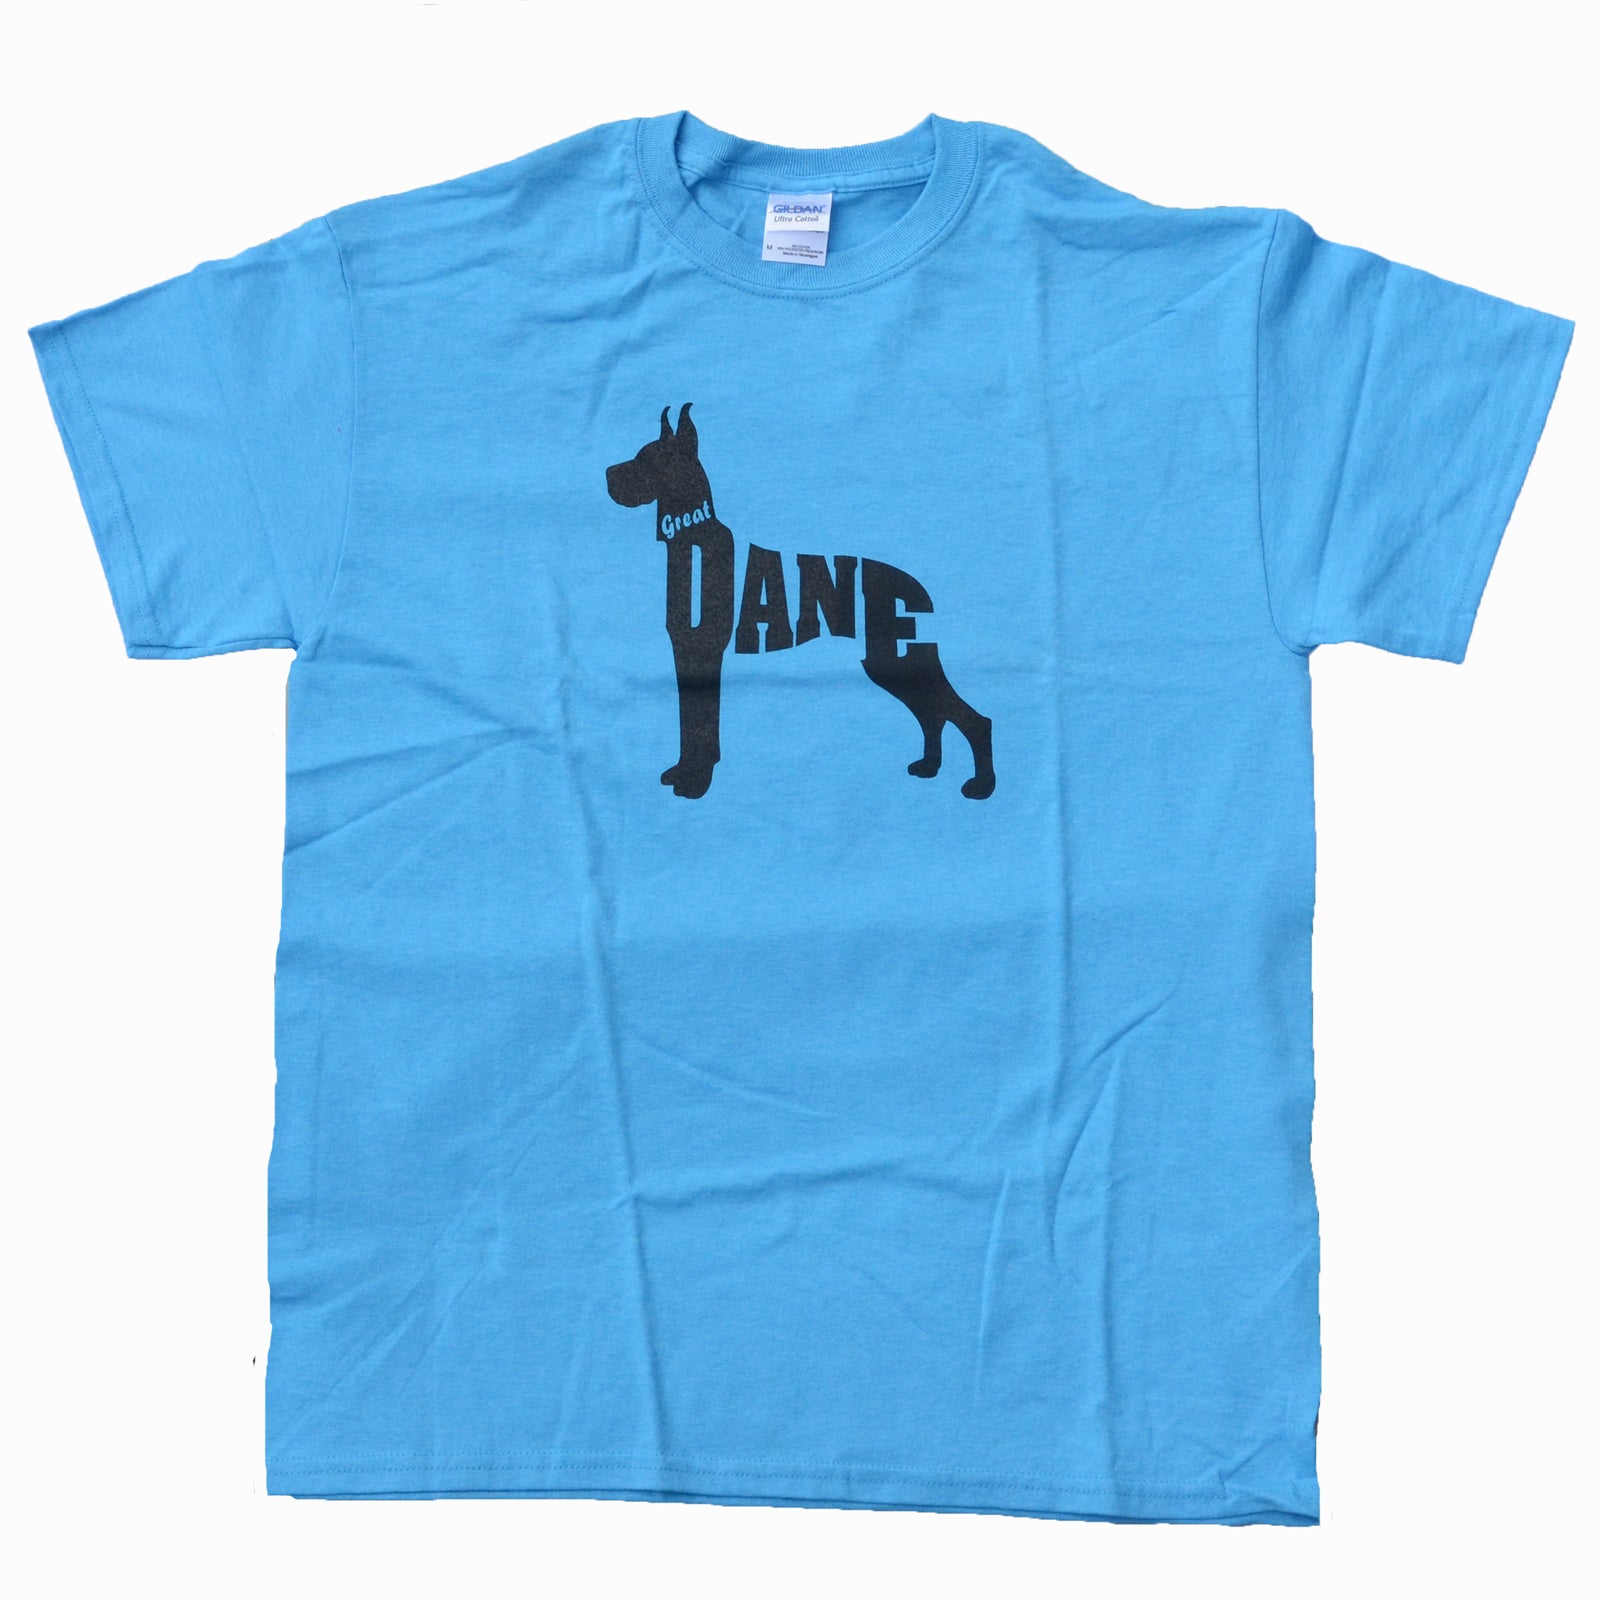 "Great Dane T-Shirt" - only 1 left in large